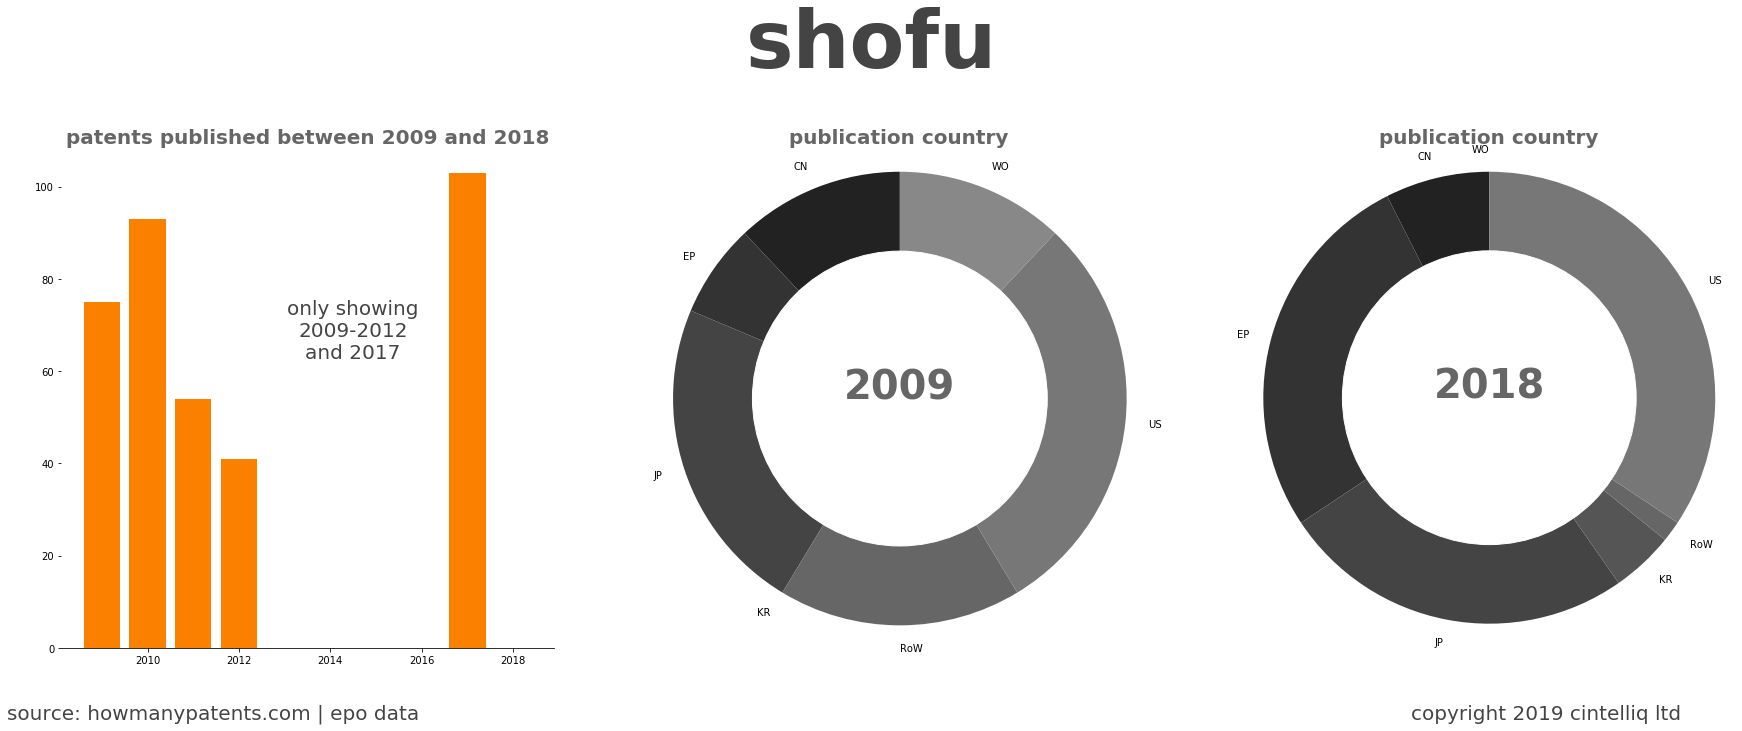 summary of patents for Shofu